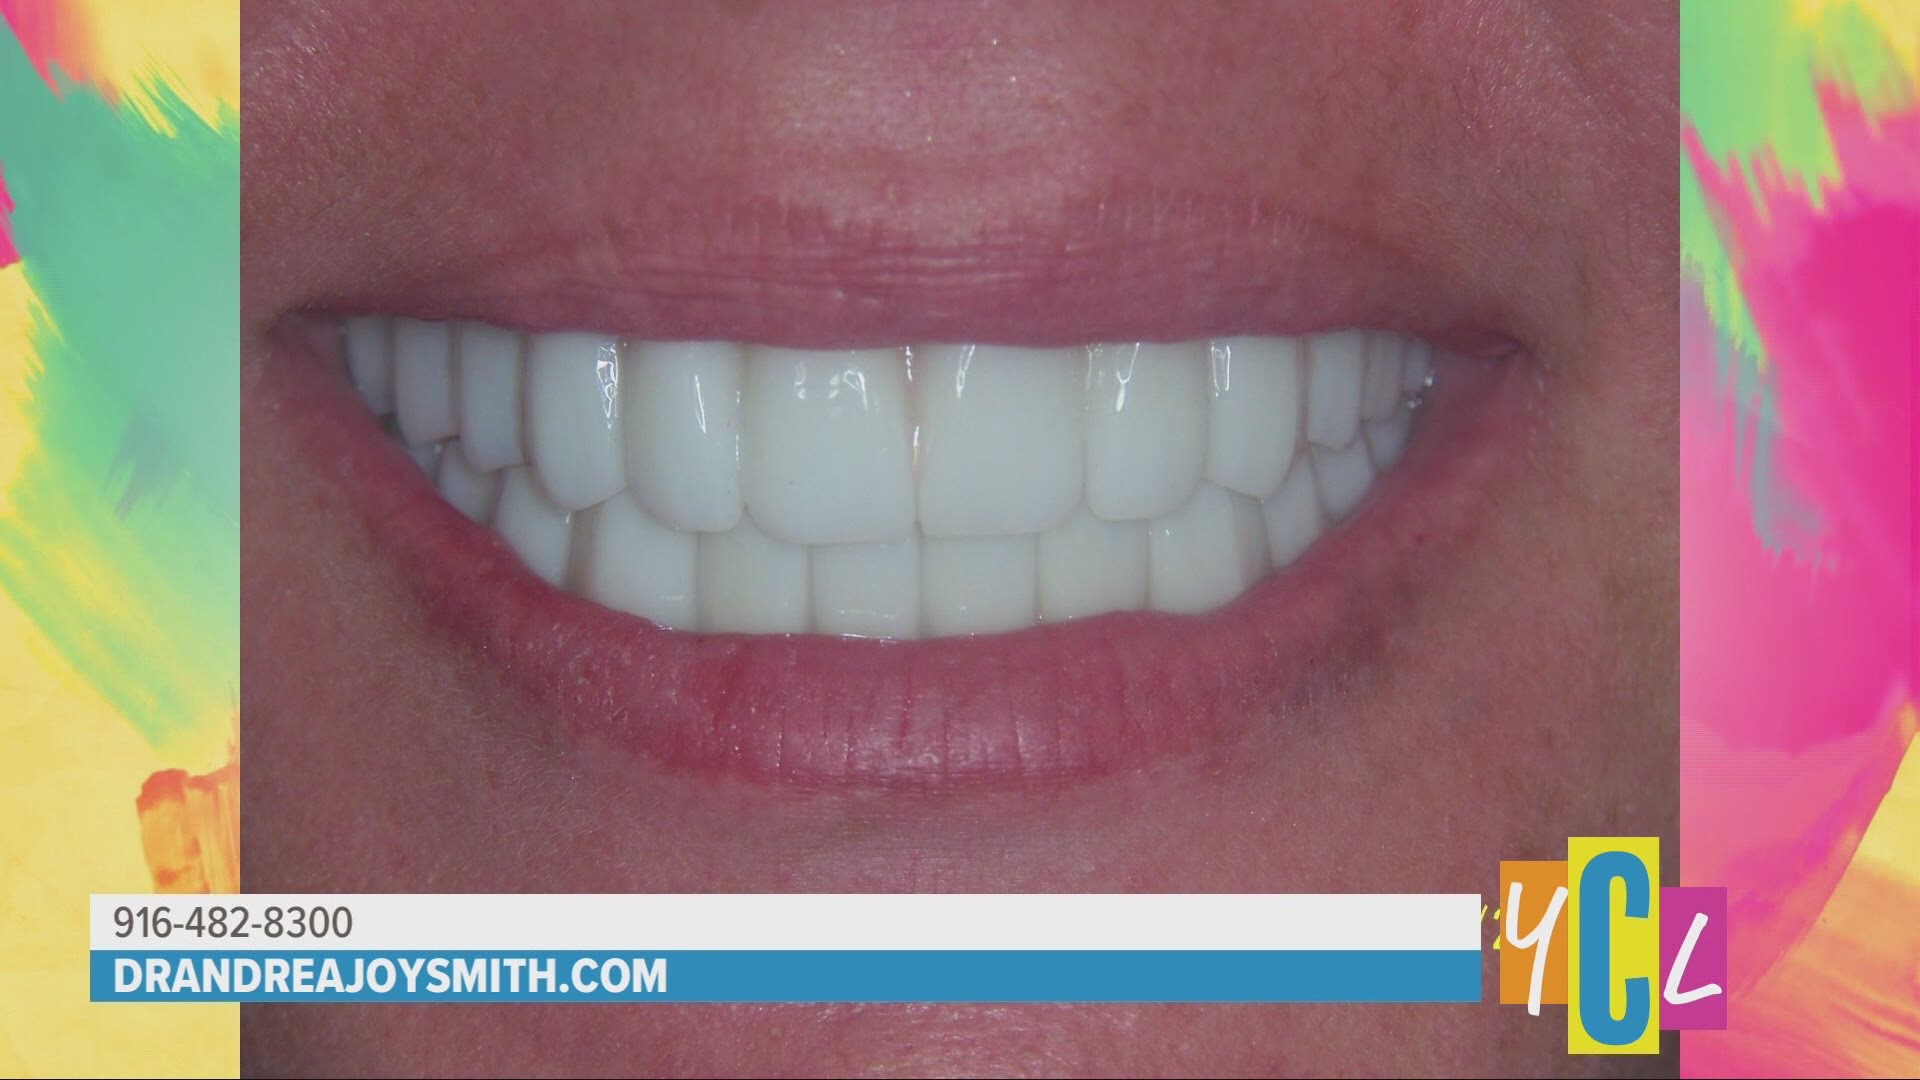 Mini-dental implants may be the solution to replace missing teeth, at a lower cost than dentures. This segment was paid for by Dr. Andrea Joy Smith.